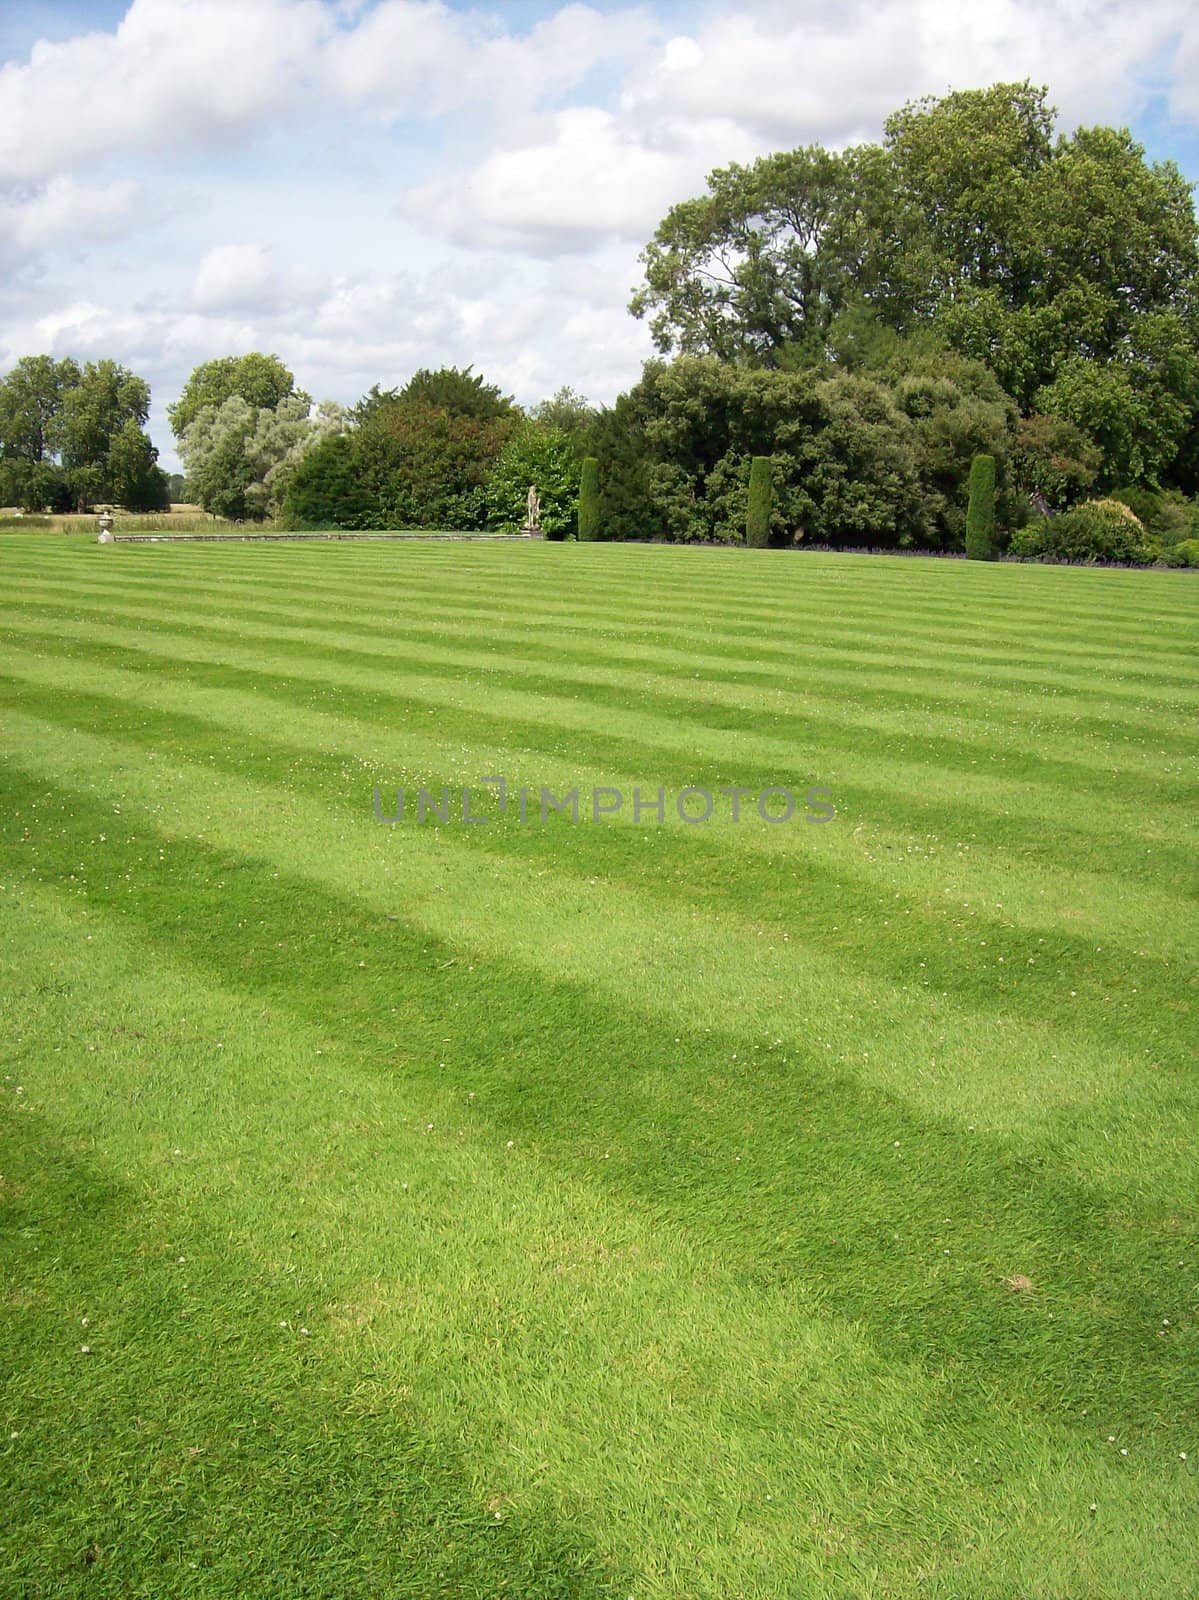 Photo of a striped lawn garden with trees in the distance